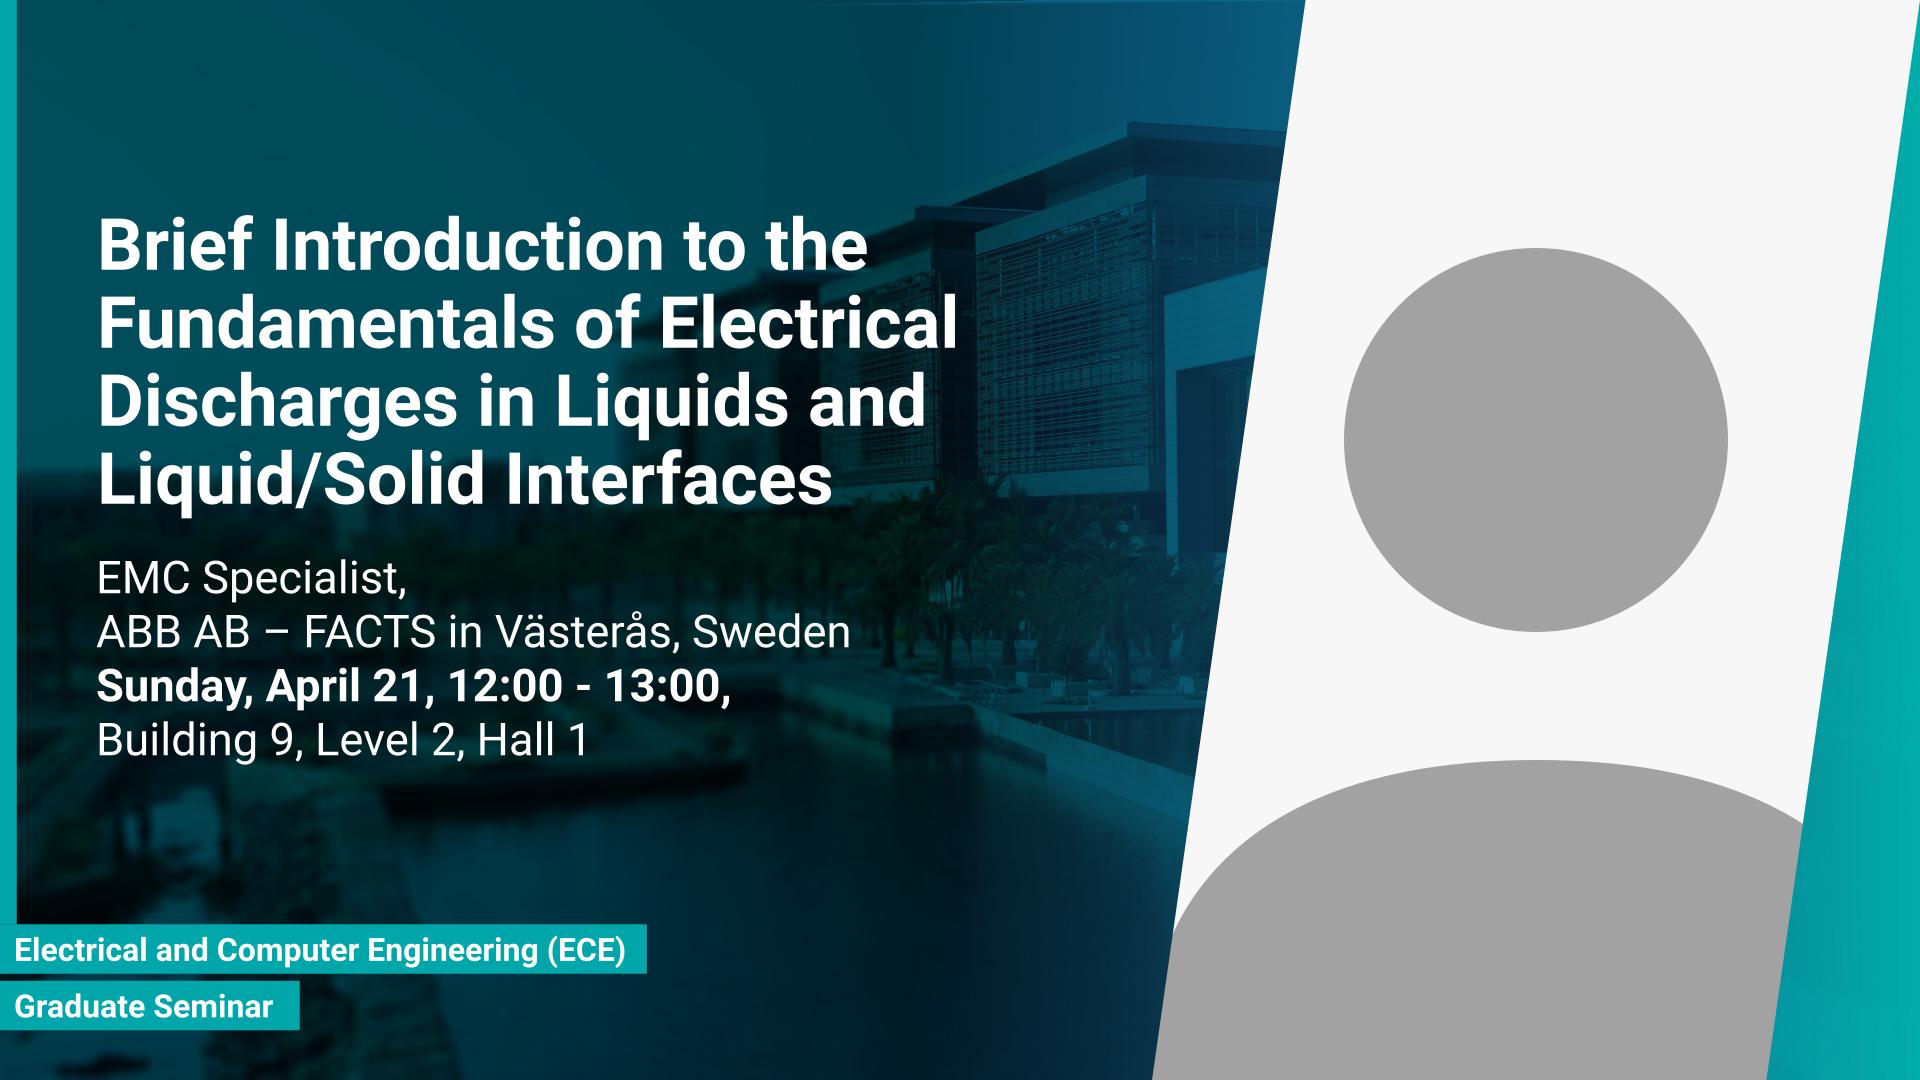 KAUST CEMSE ECE Graduate Seminar Introduction Fundamentals of Electrical Discharges in Liquids